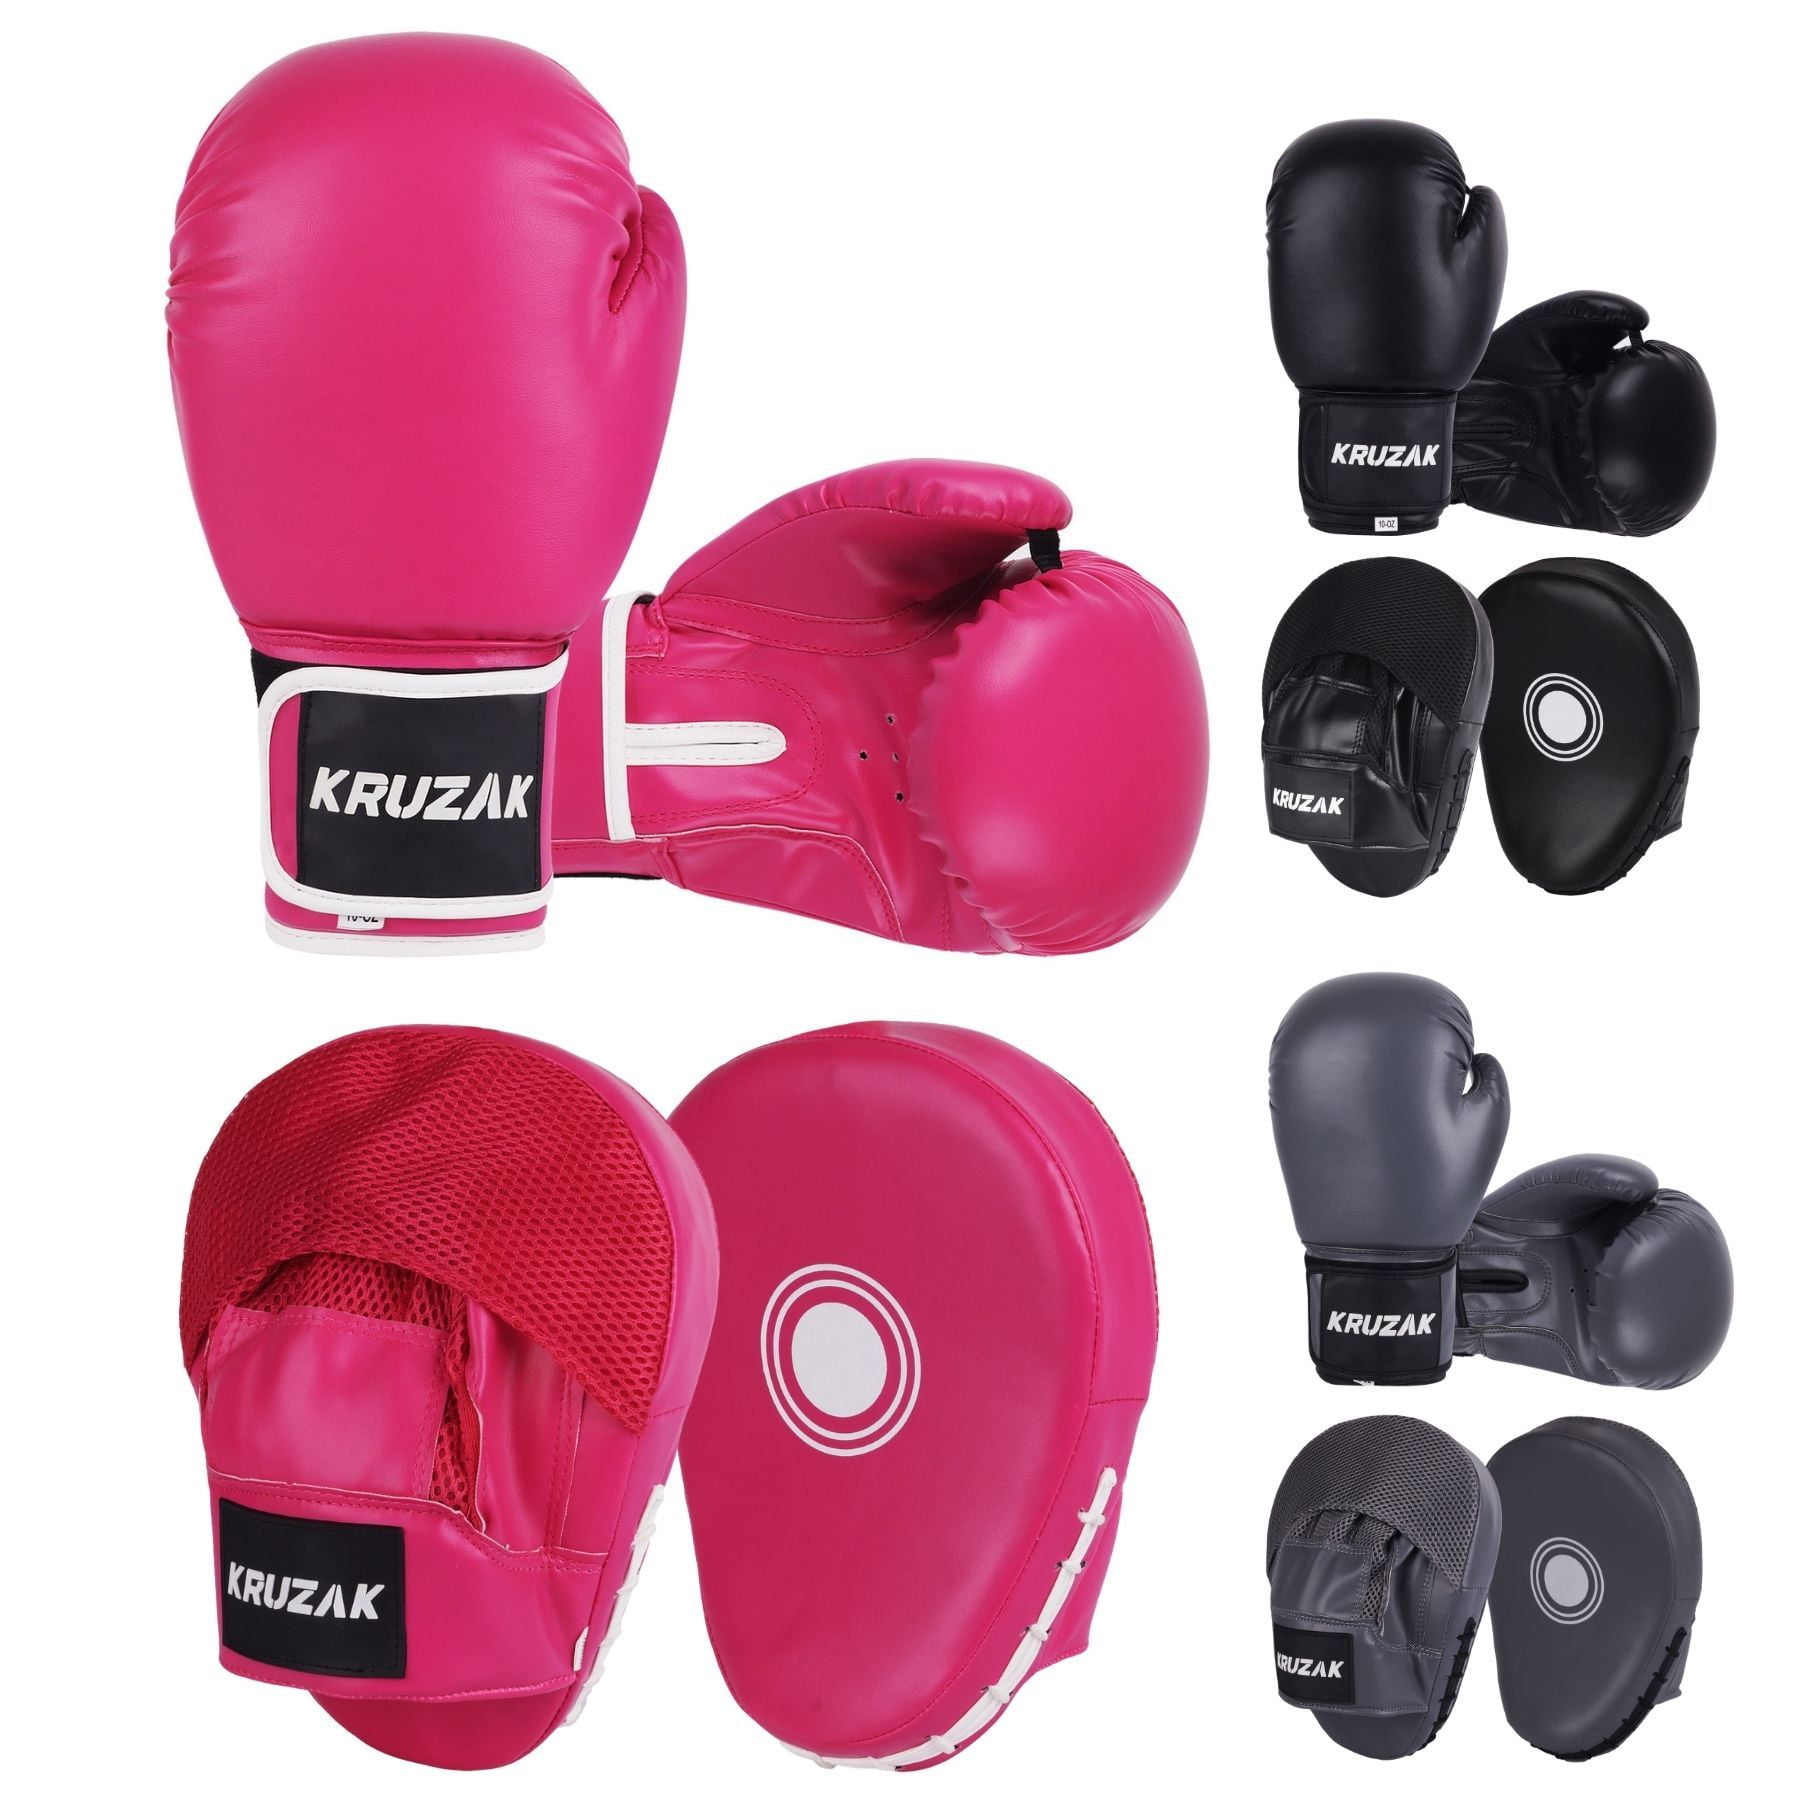 Pair of Boxing Punching Pads Mitts Gloves Focus Boxing Pads Sparring Gloves 